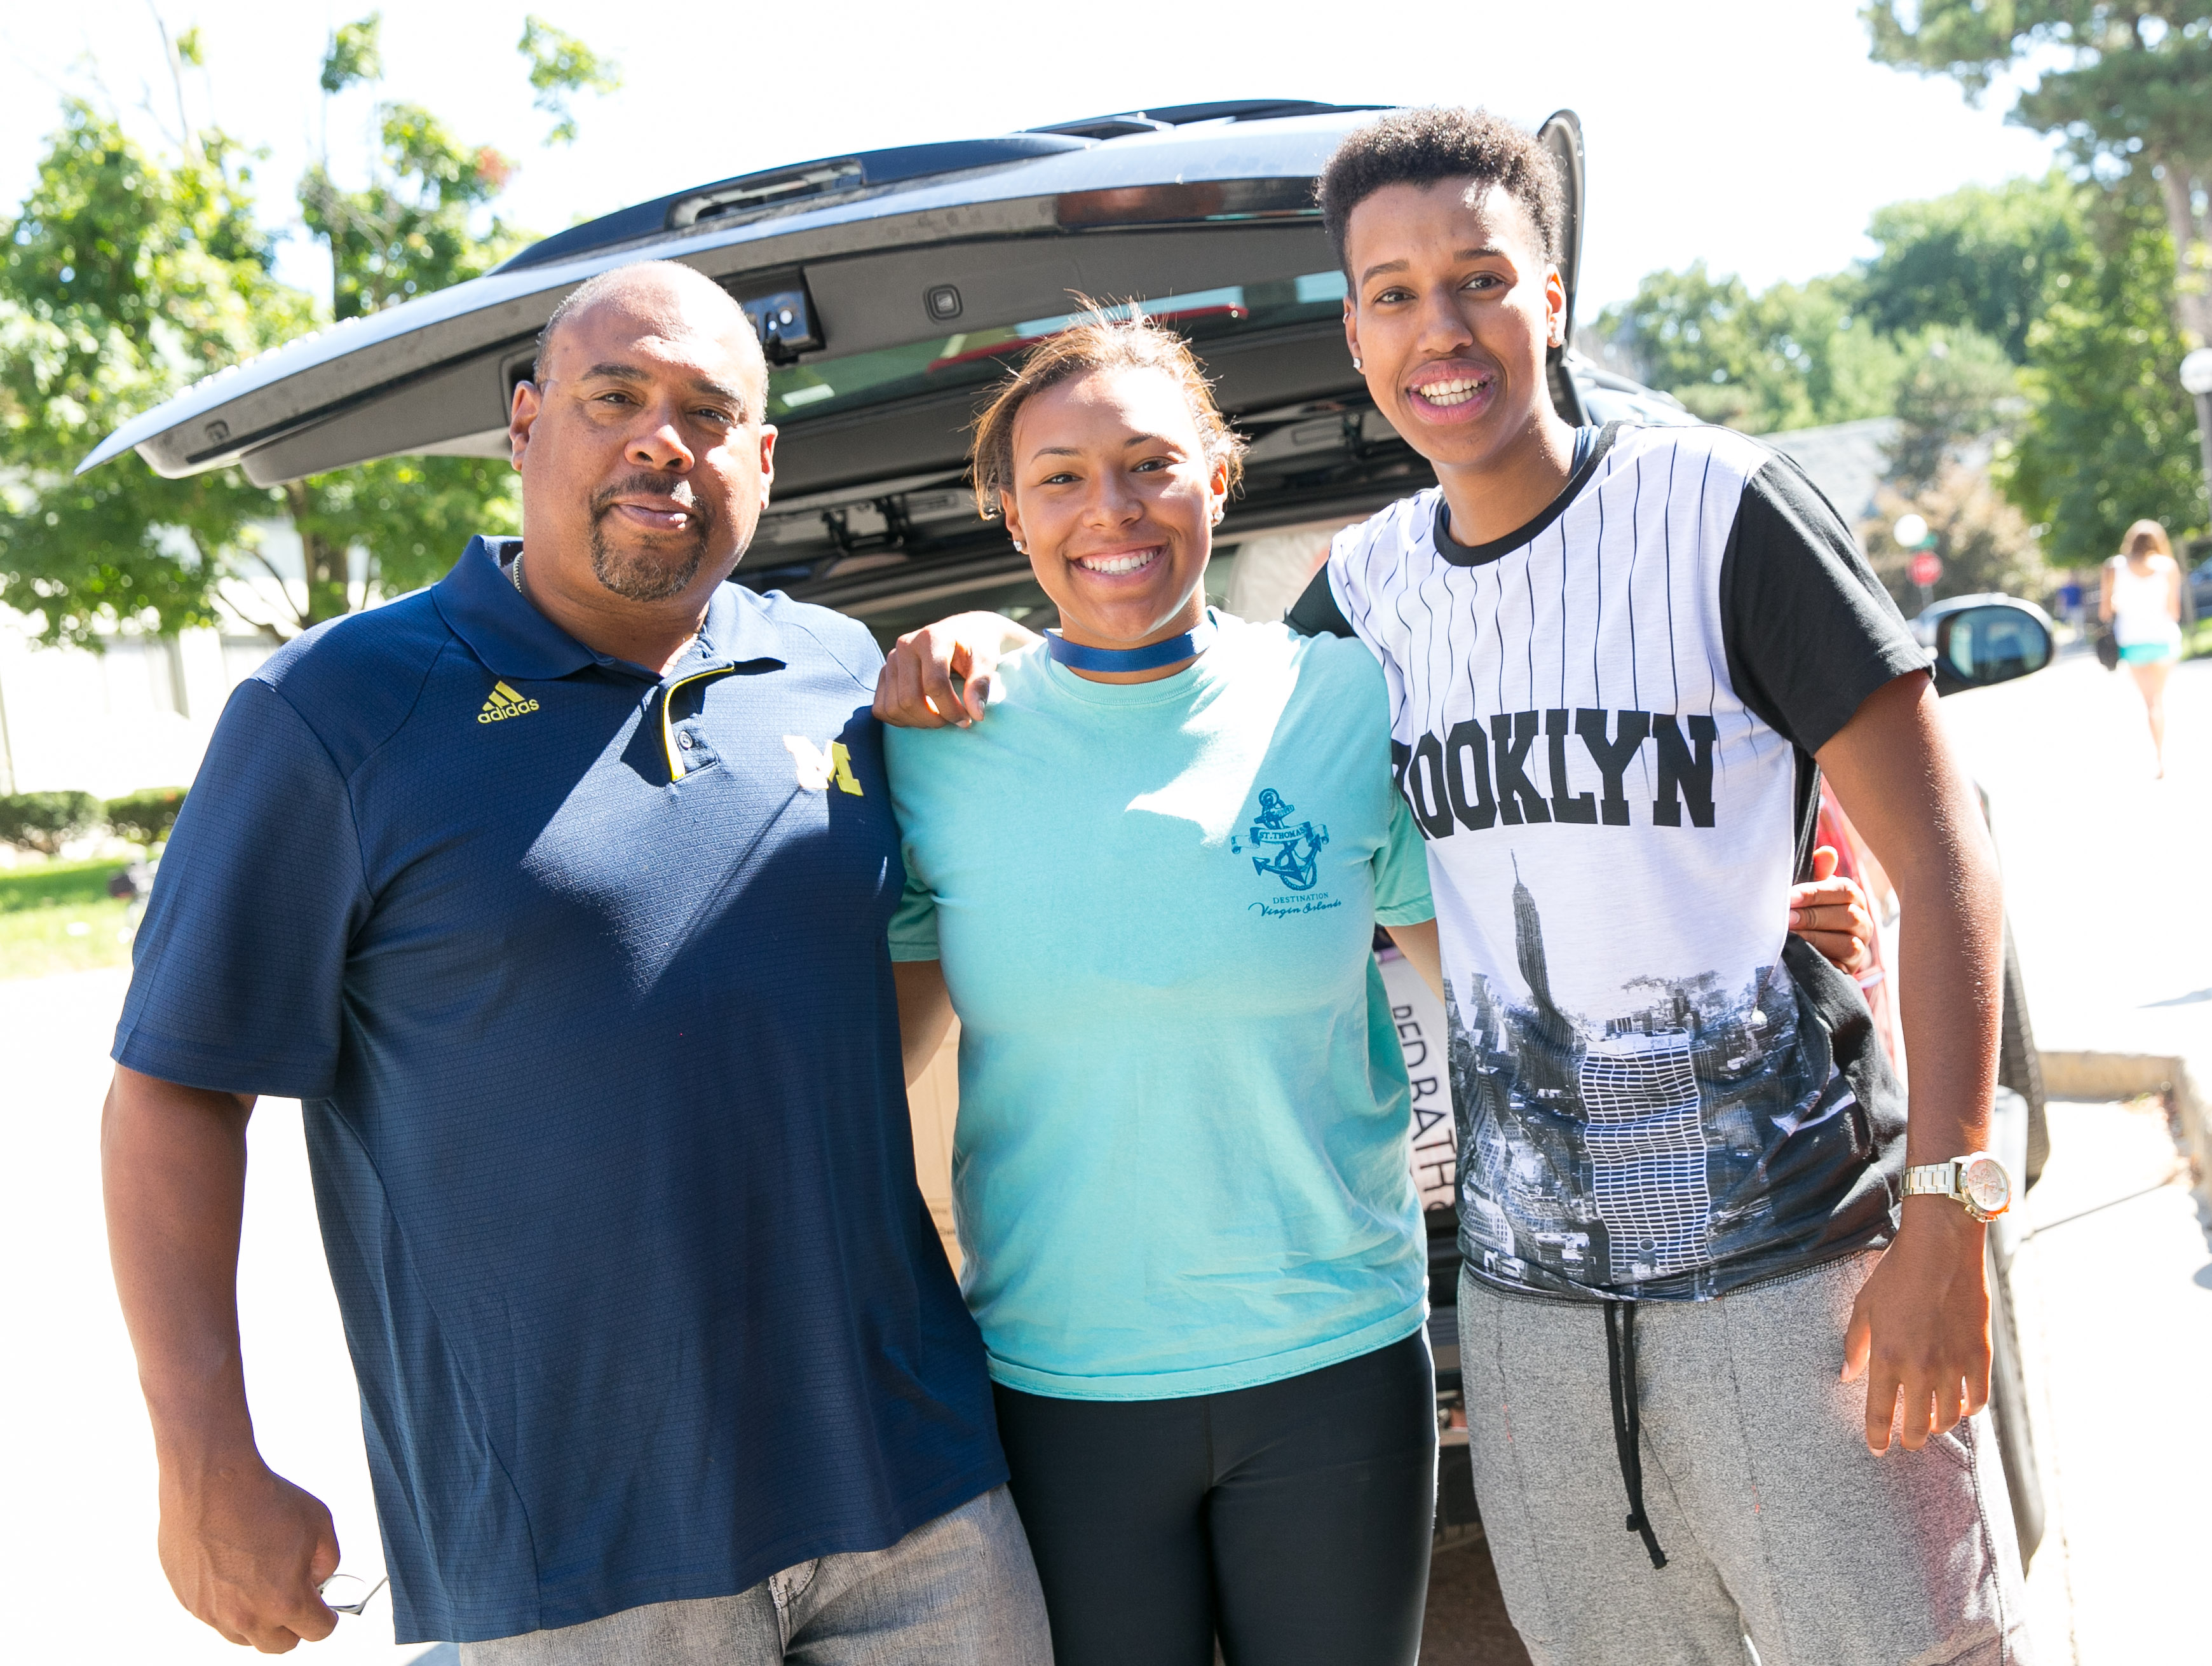 Family posing near car on move-in day.